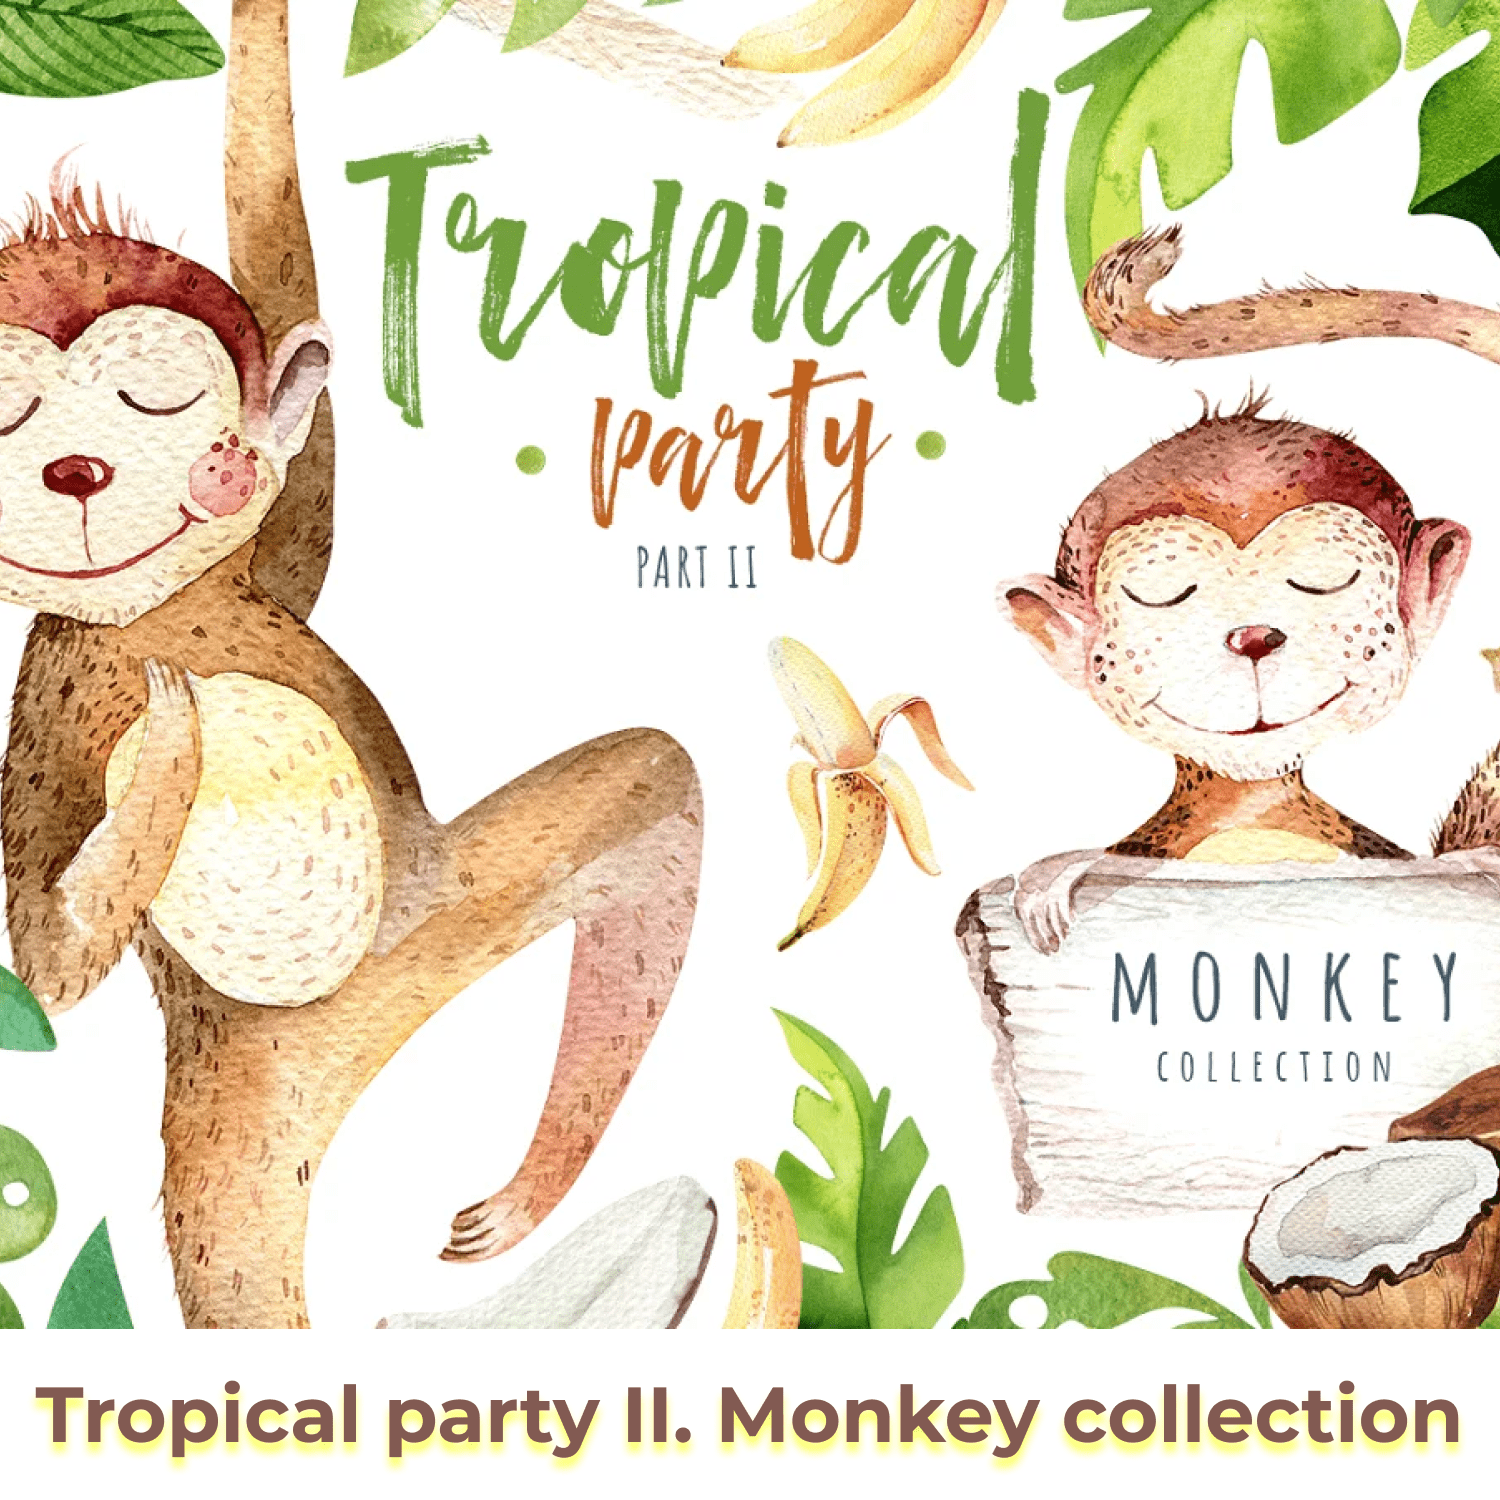 Tropical party II. Monkey collection cover.